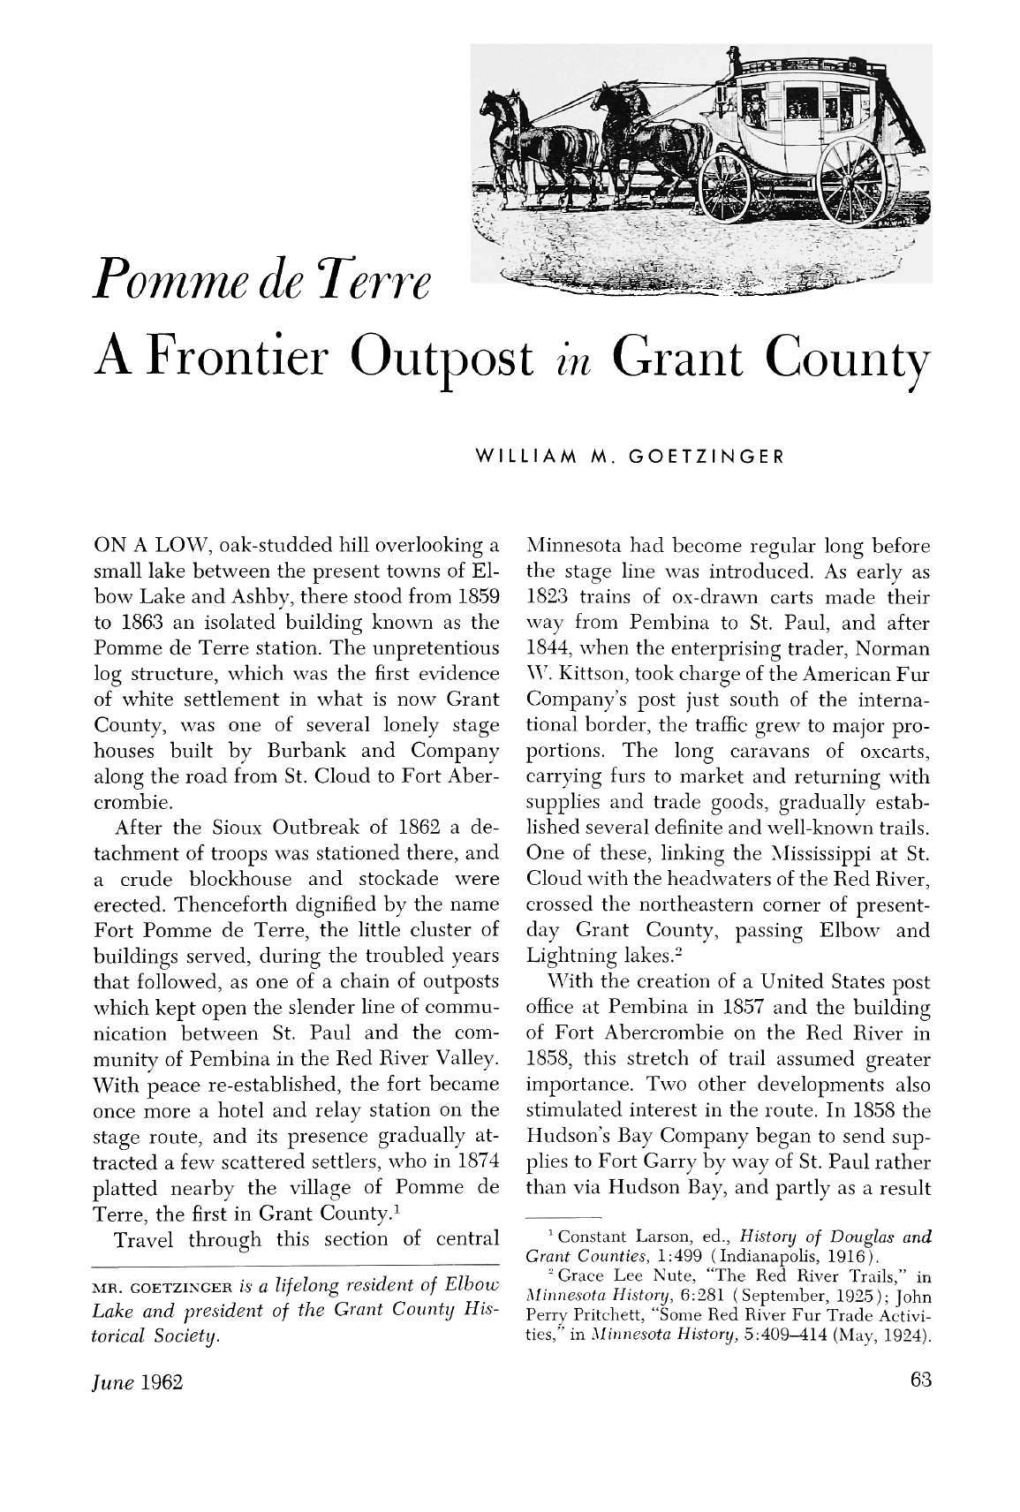 Pomme De Terre, a Frontier Outpost in Grant County